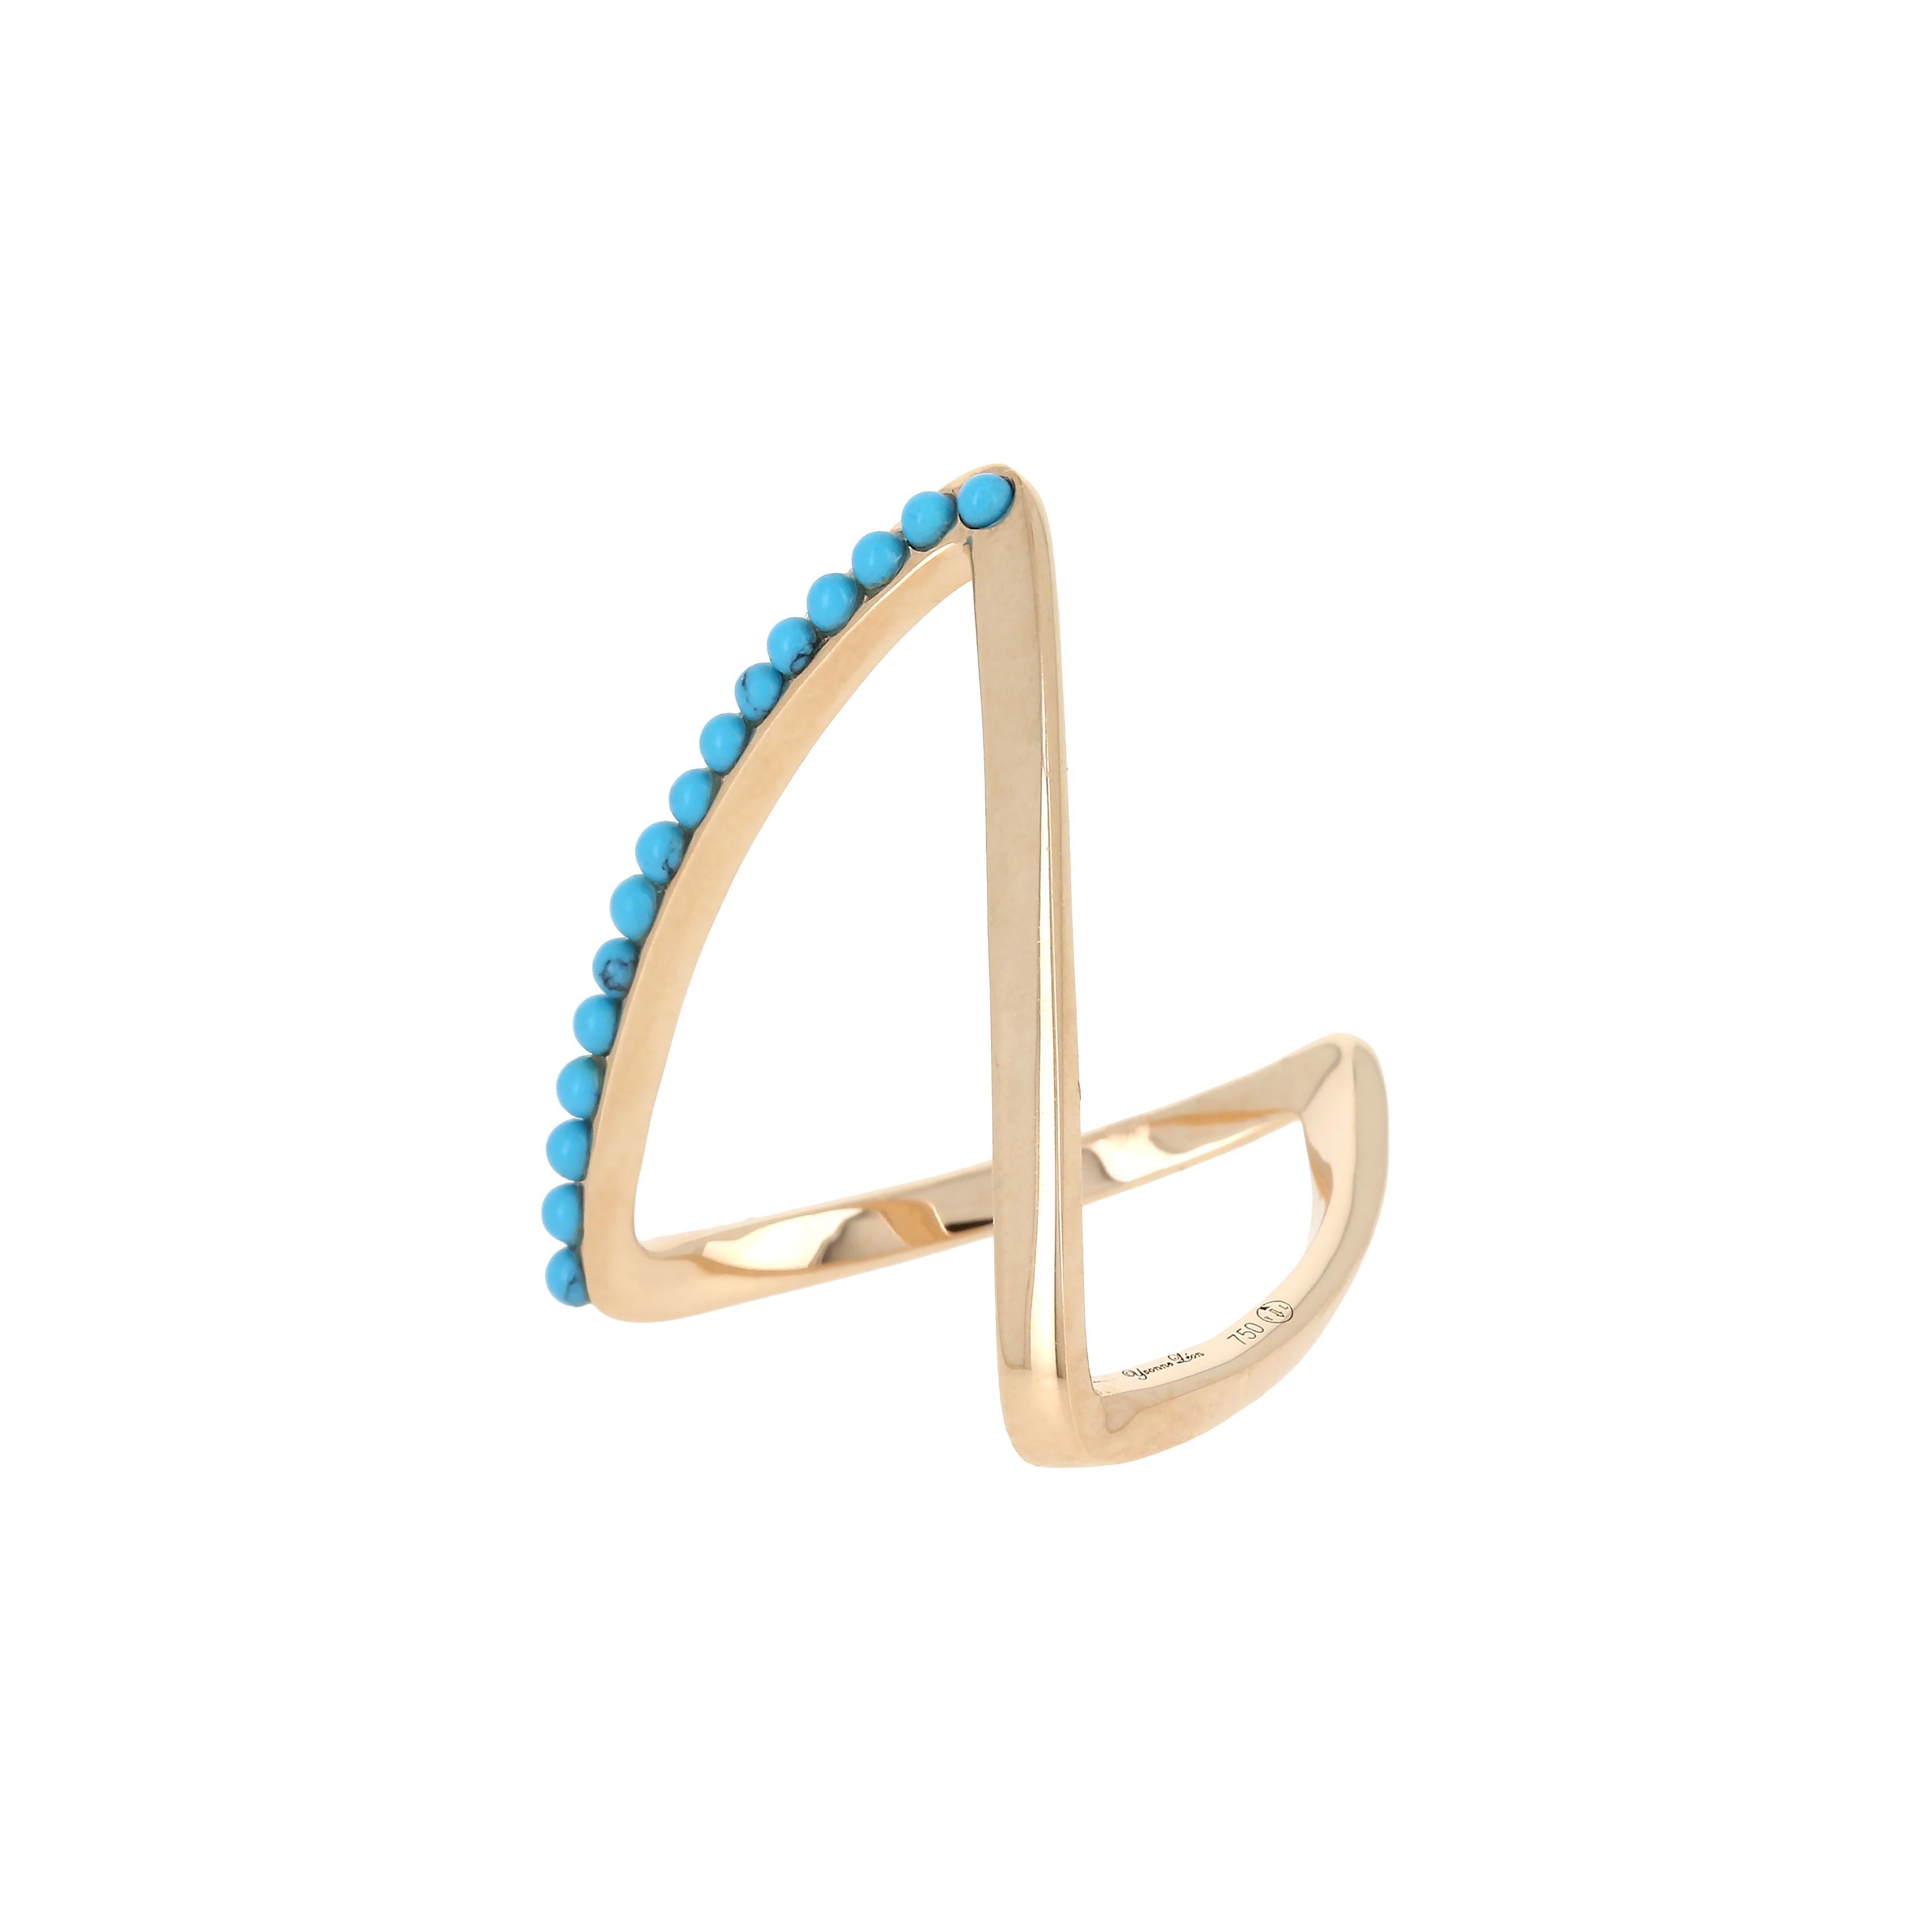 Women's Yvonne Leon's Ring Viviane in 18 Carat Yellow Gold and Turquoises